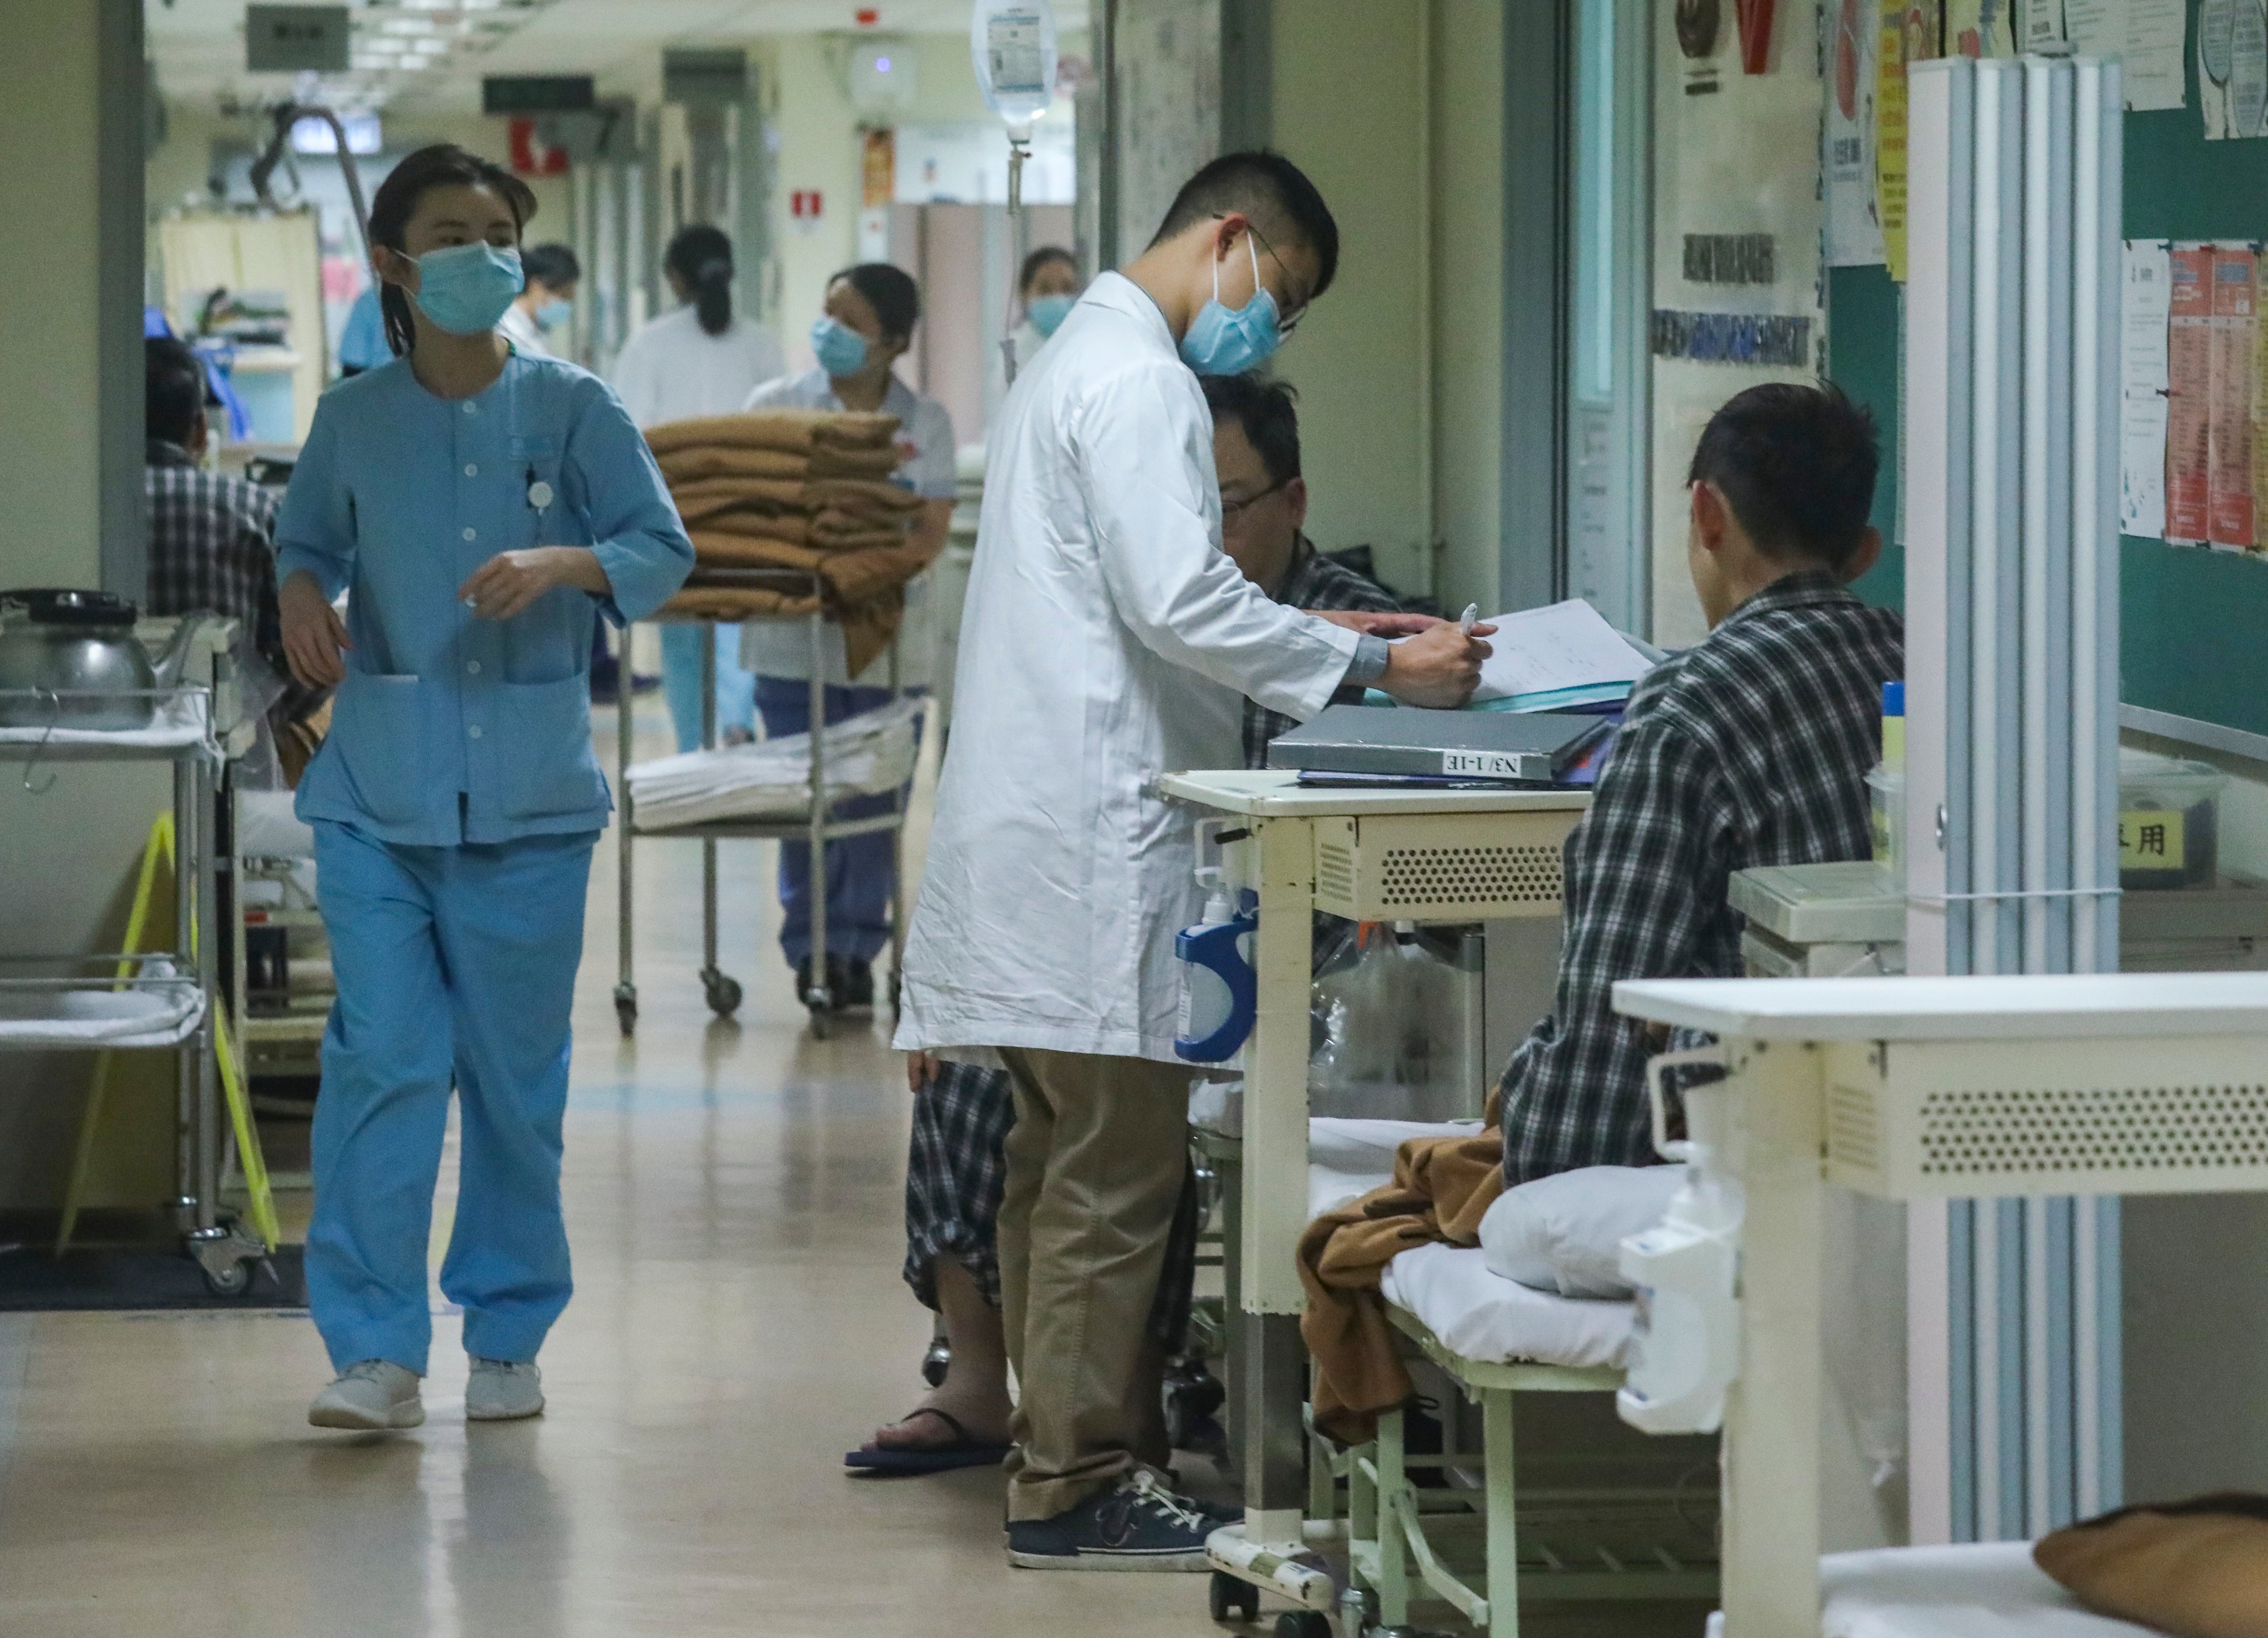 Hong Kong’s two medical schools say they could increase first-year intakes by 100 students a year each to help cope with healthcare staff shortages. Photo: Nora Tam